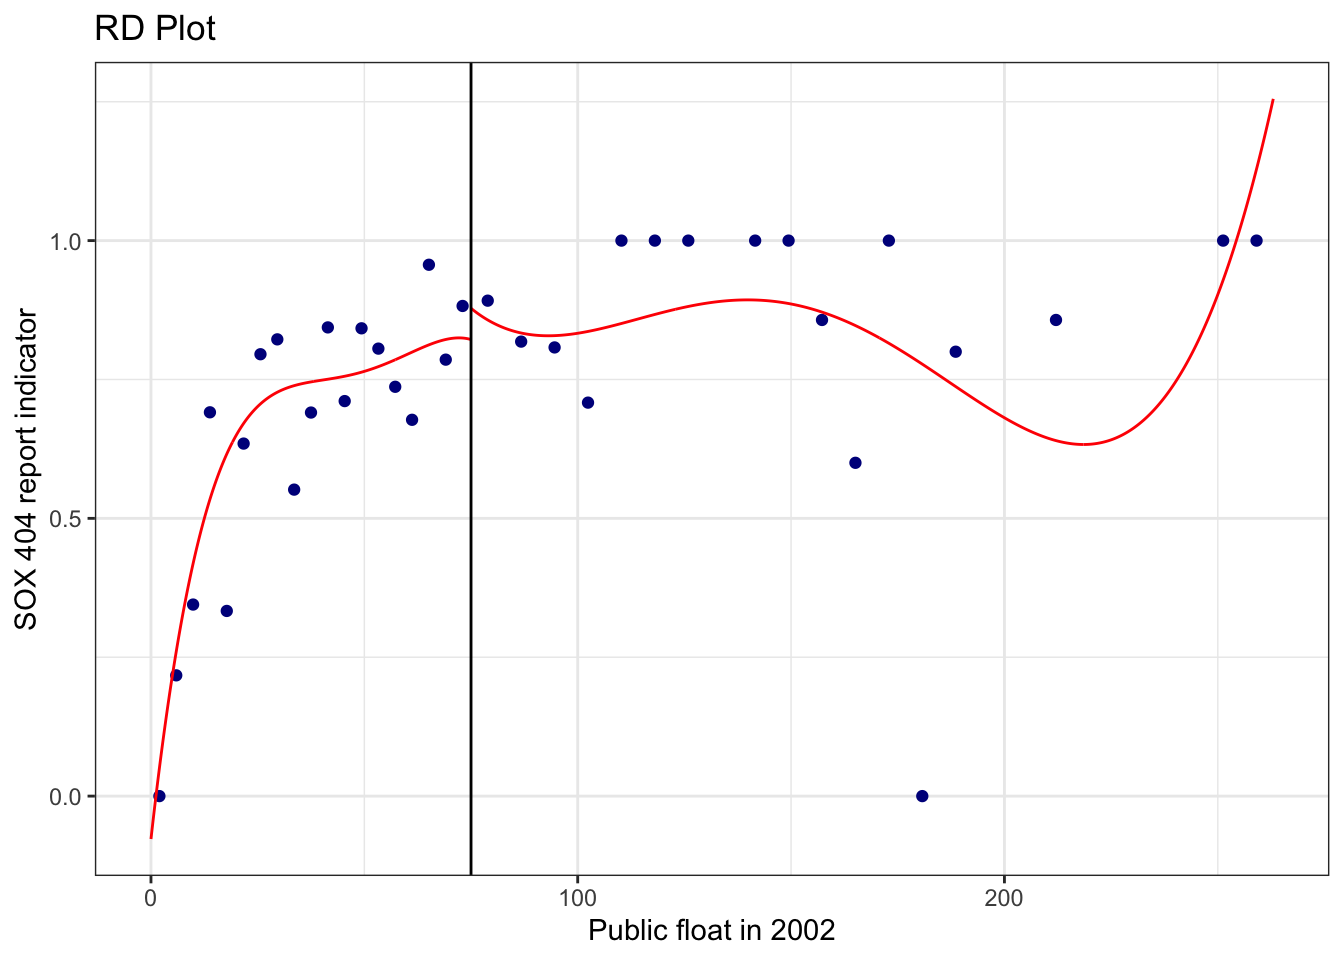 Plot of mean value of SOX 404 report indicator (y-axis) by bins based on 2002 public float. Plot also shows fitted curves on each side of the $75 million cutoff. There is a noticeable jump in the fitted curves at the cutoff, but there is no other clear relationship evident from the plot and the jump is plausibly an artifact of overfitting observations near the cutoff.